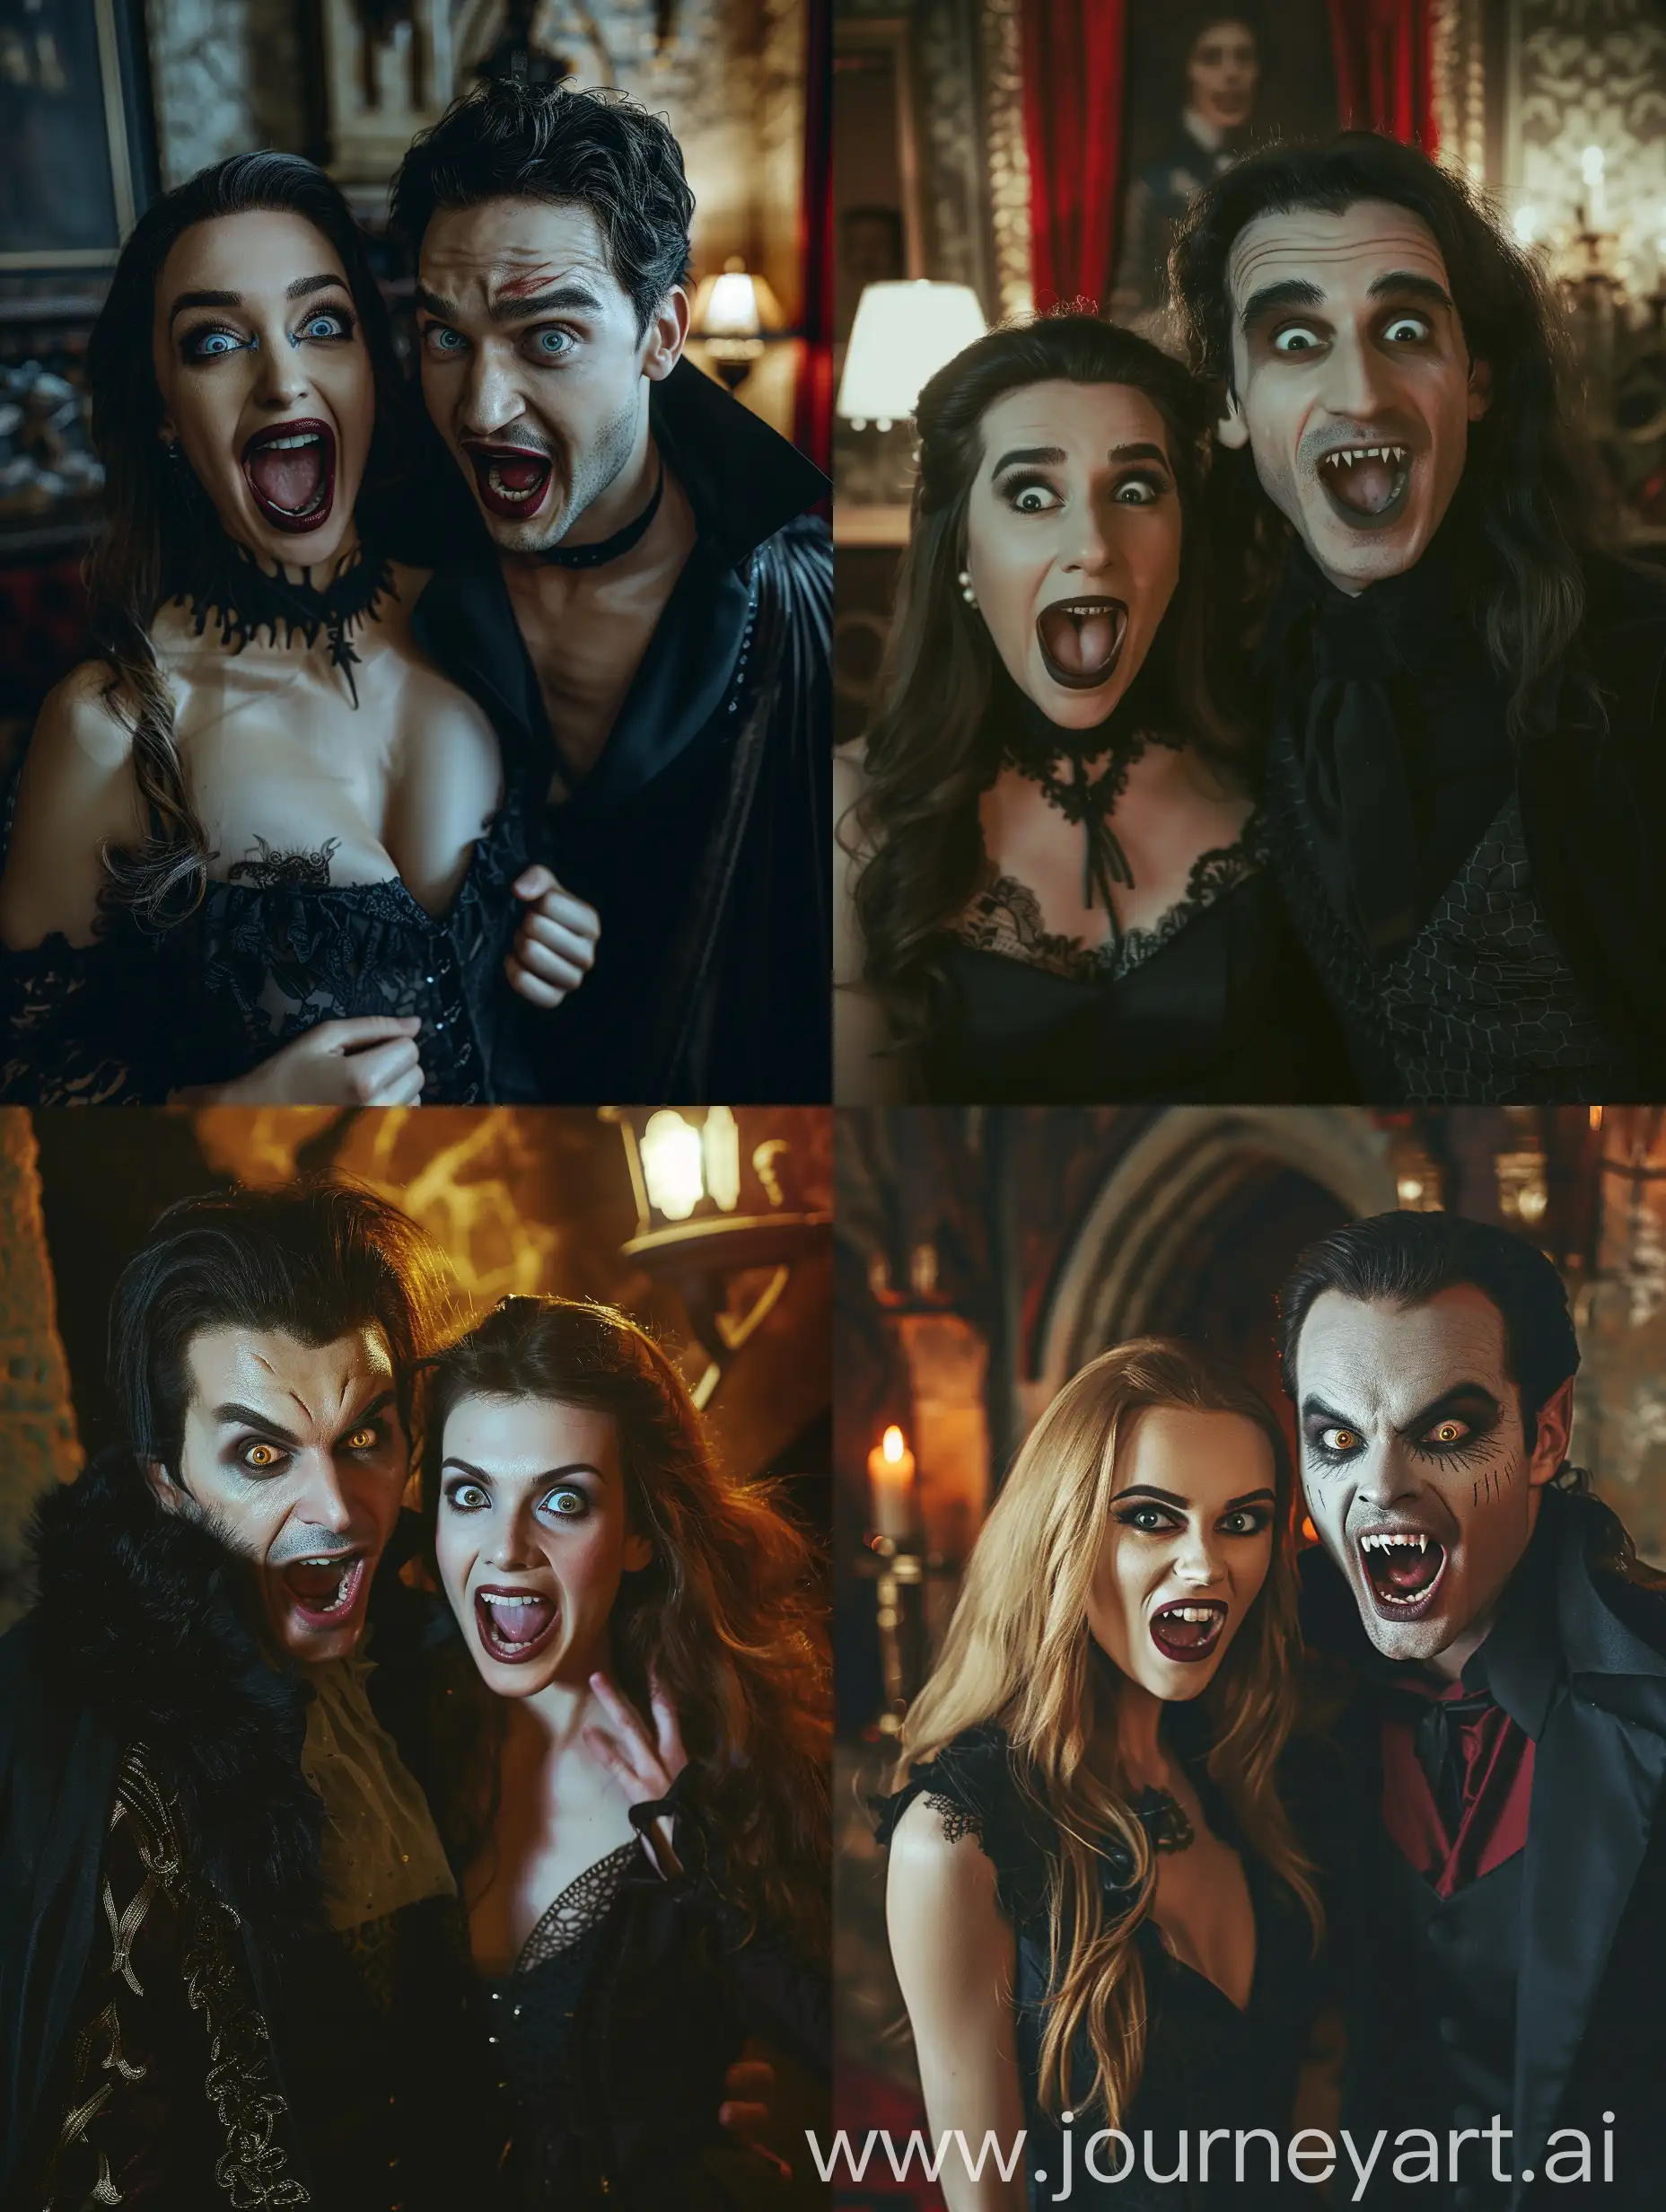 professional photographs of a vampire with a beautiful woman, twenty years old, expressive eyes and facial features, excited expression, intimate poses, front, ancient castle interior, lamplight, fill lighting, focused photographic images of woman and vampire, dramatic colour photography, artistic depth of field, photorealism